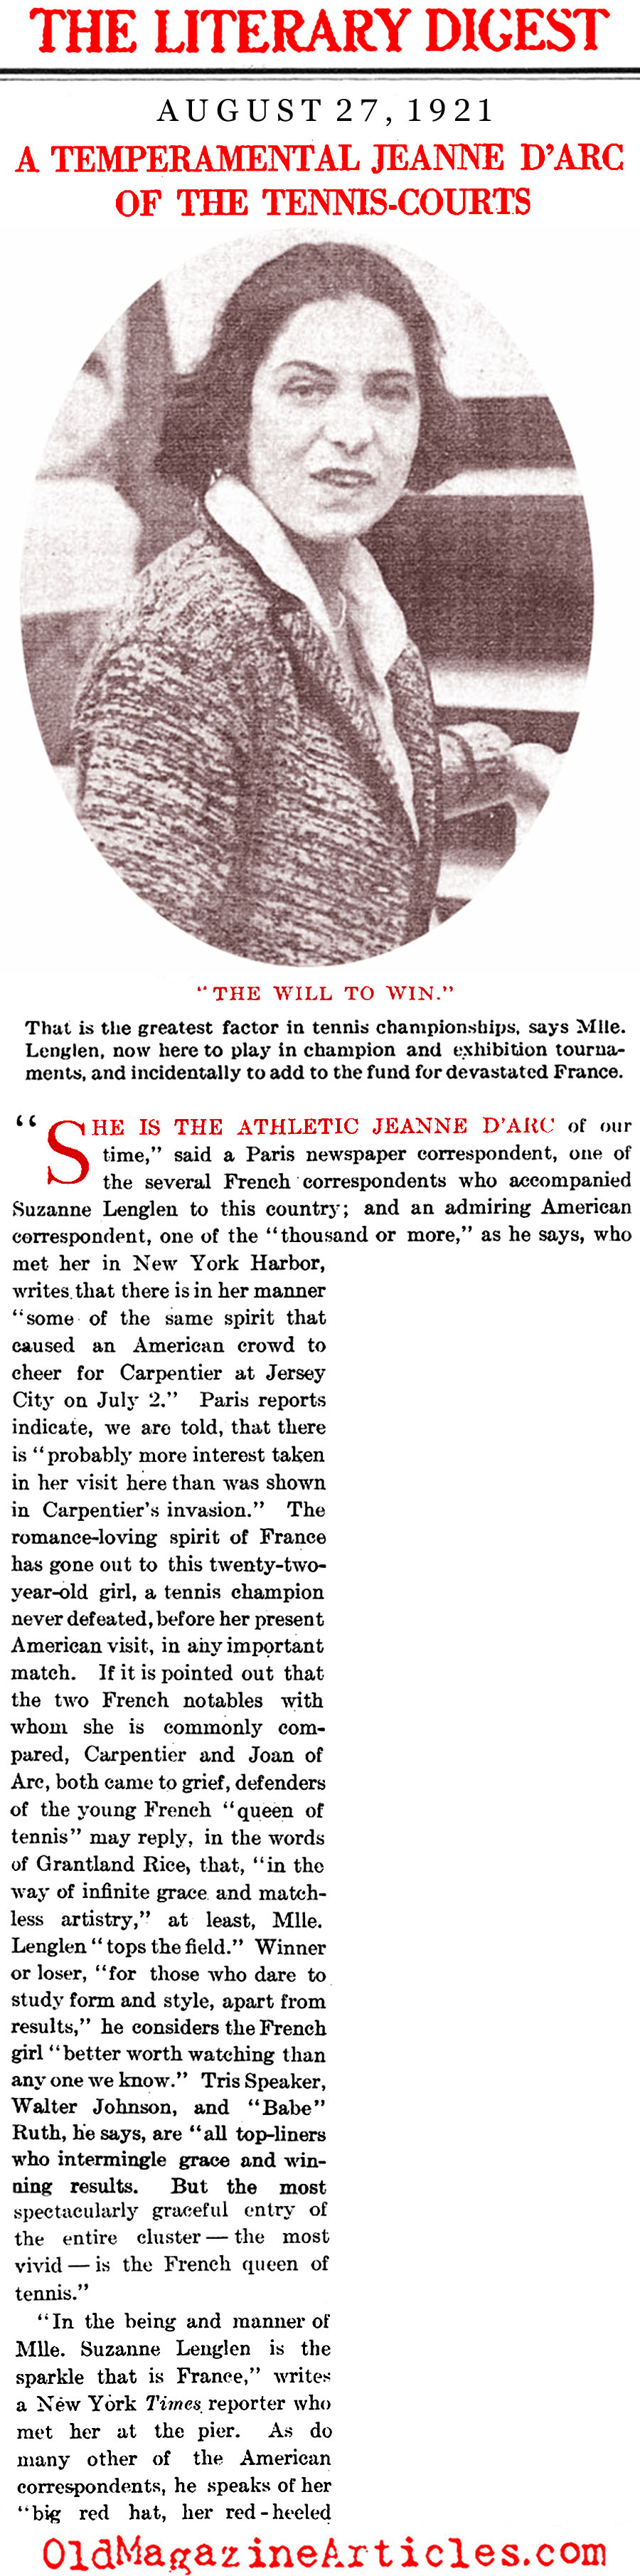 An Interview with Suzanne Lenglen (Literary Digest, 1921)